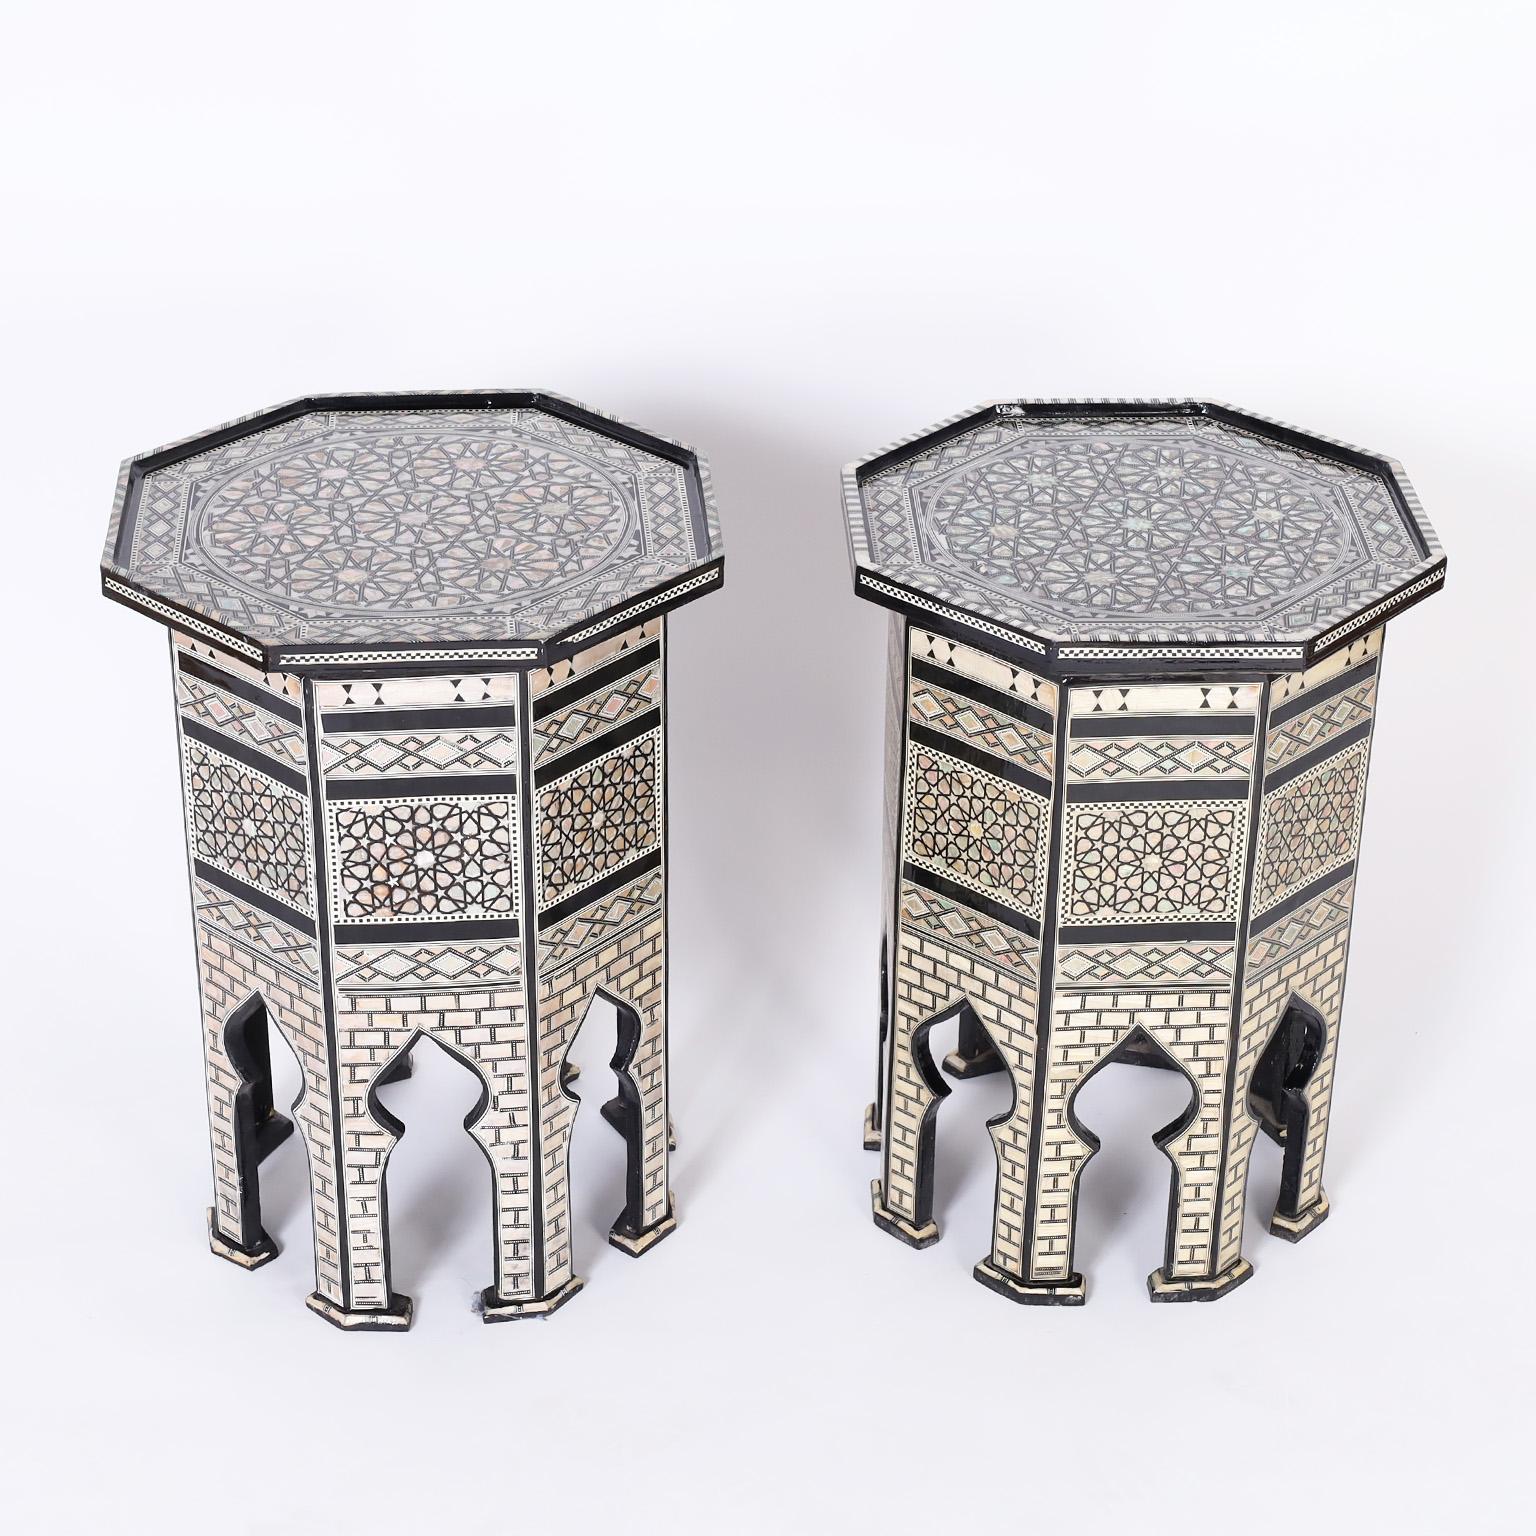 Near pair of octagon form Moroccan stands crafted in indigenous hardwood lacquered black and featuring geometric mother of pearl marquetry on the top and sides with Moorish arches between the eight legs. 

Left to right:

H: 23.5 W: 17 D:1